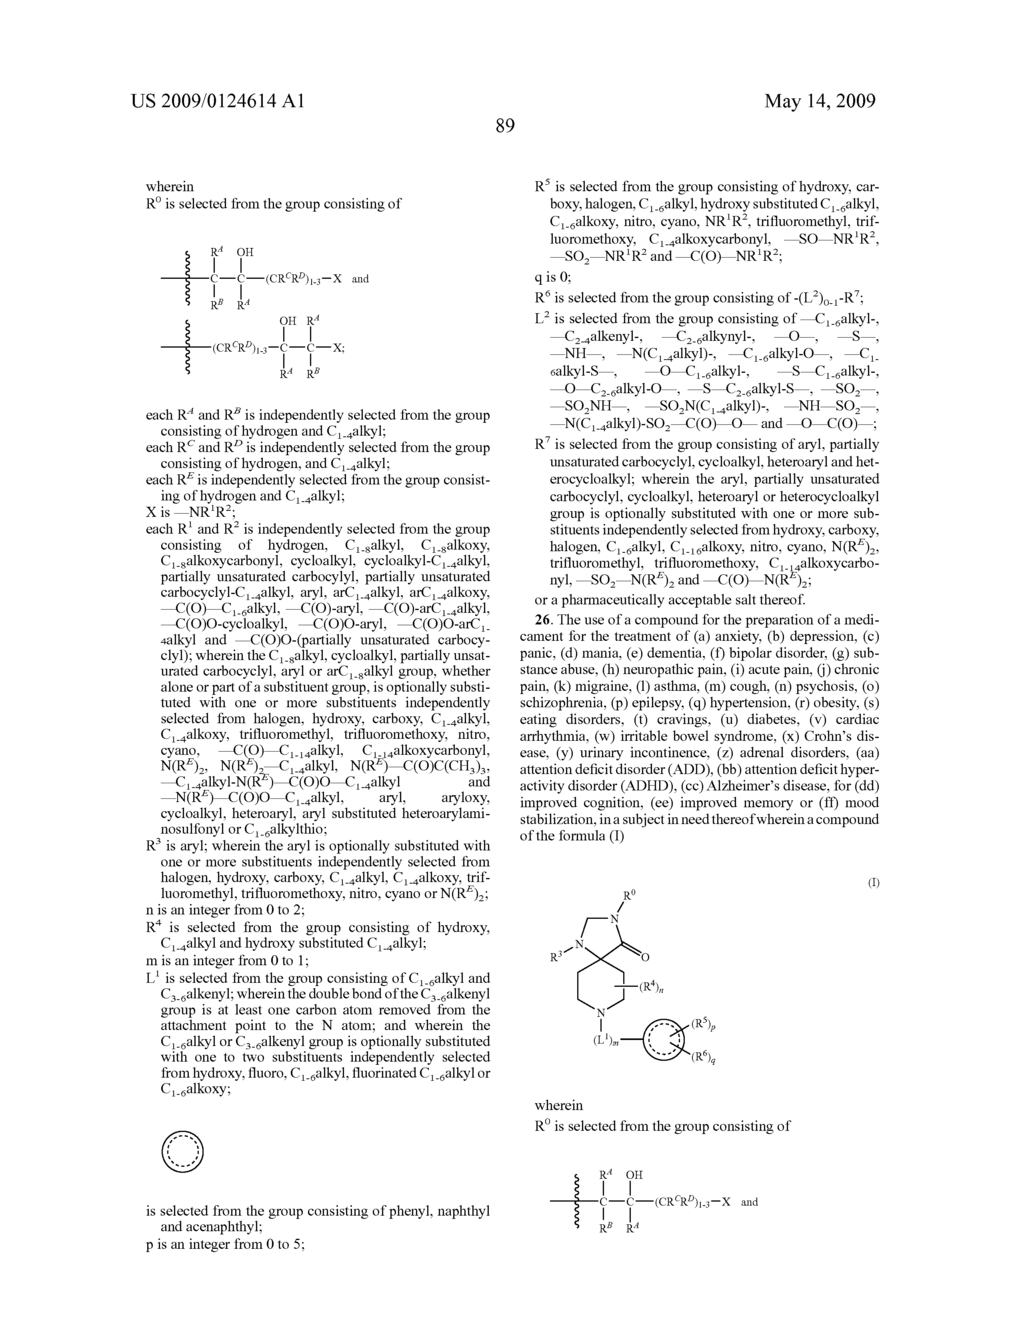 HYDROXY ALKYL SUBSTITUTED 1,3,8-TRIAZASPIRO[4.5]DECAN-4-ONE DERIVATIVES USEFUL FOR THE TREATMENT OF ORL-1 RECEPTOR MEDIATED DISORDERS - diagram, schematic, and image 90